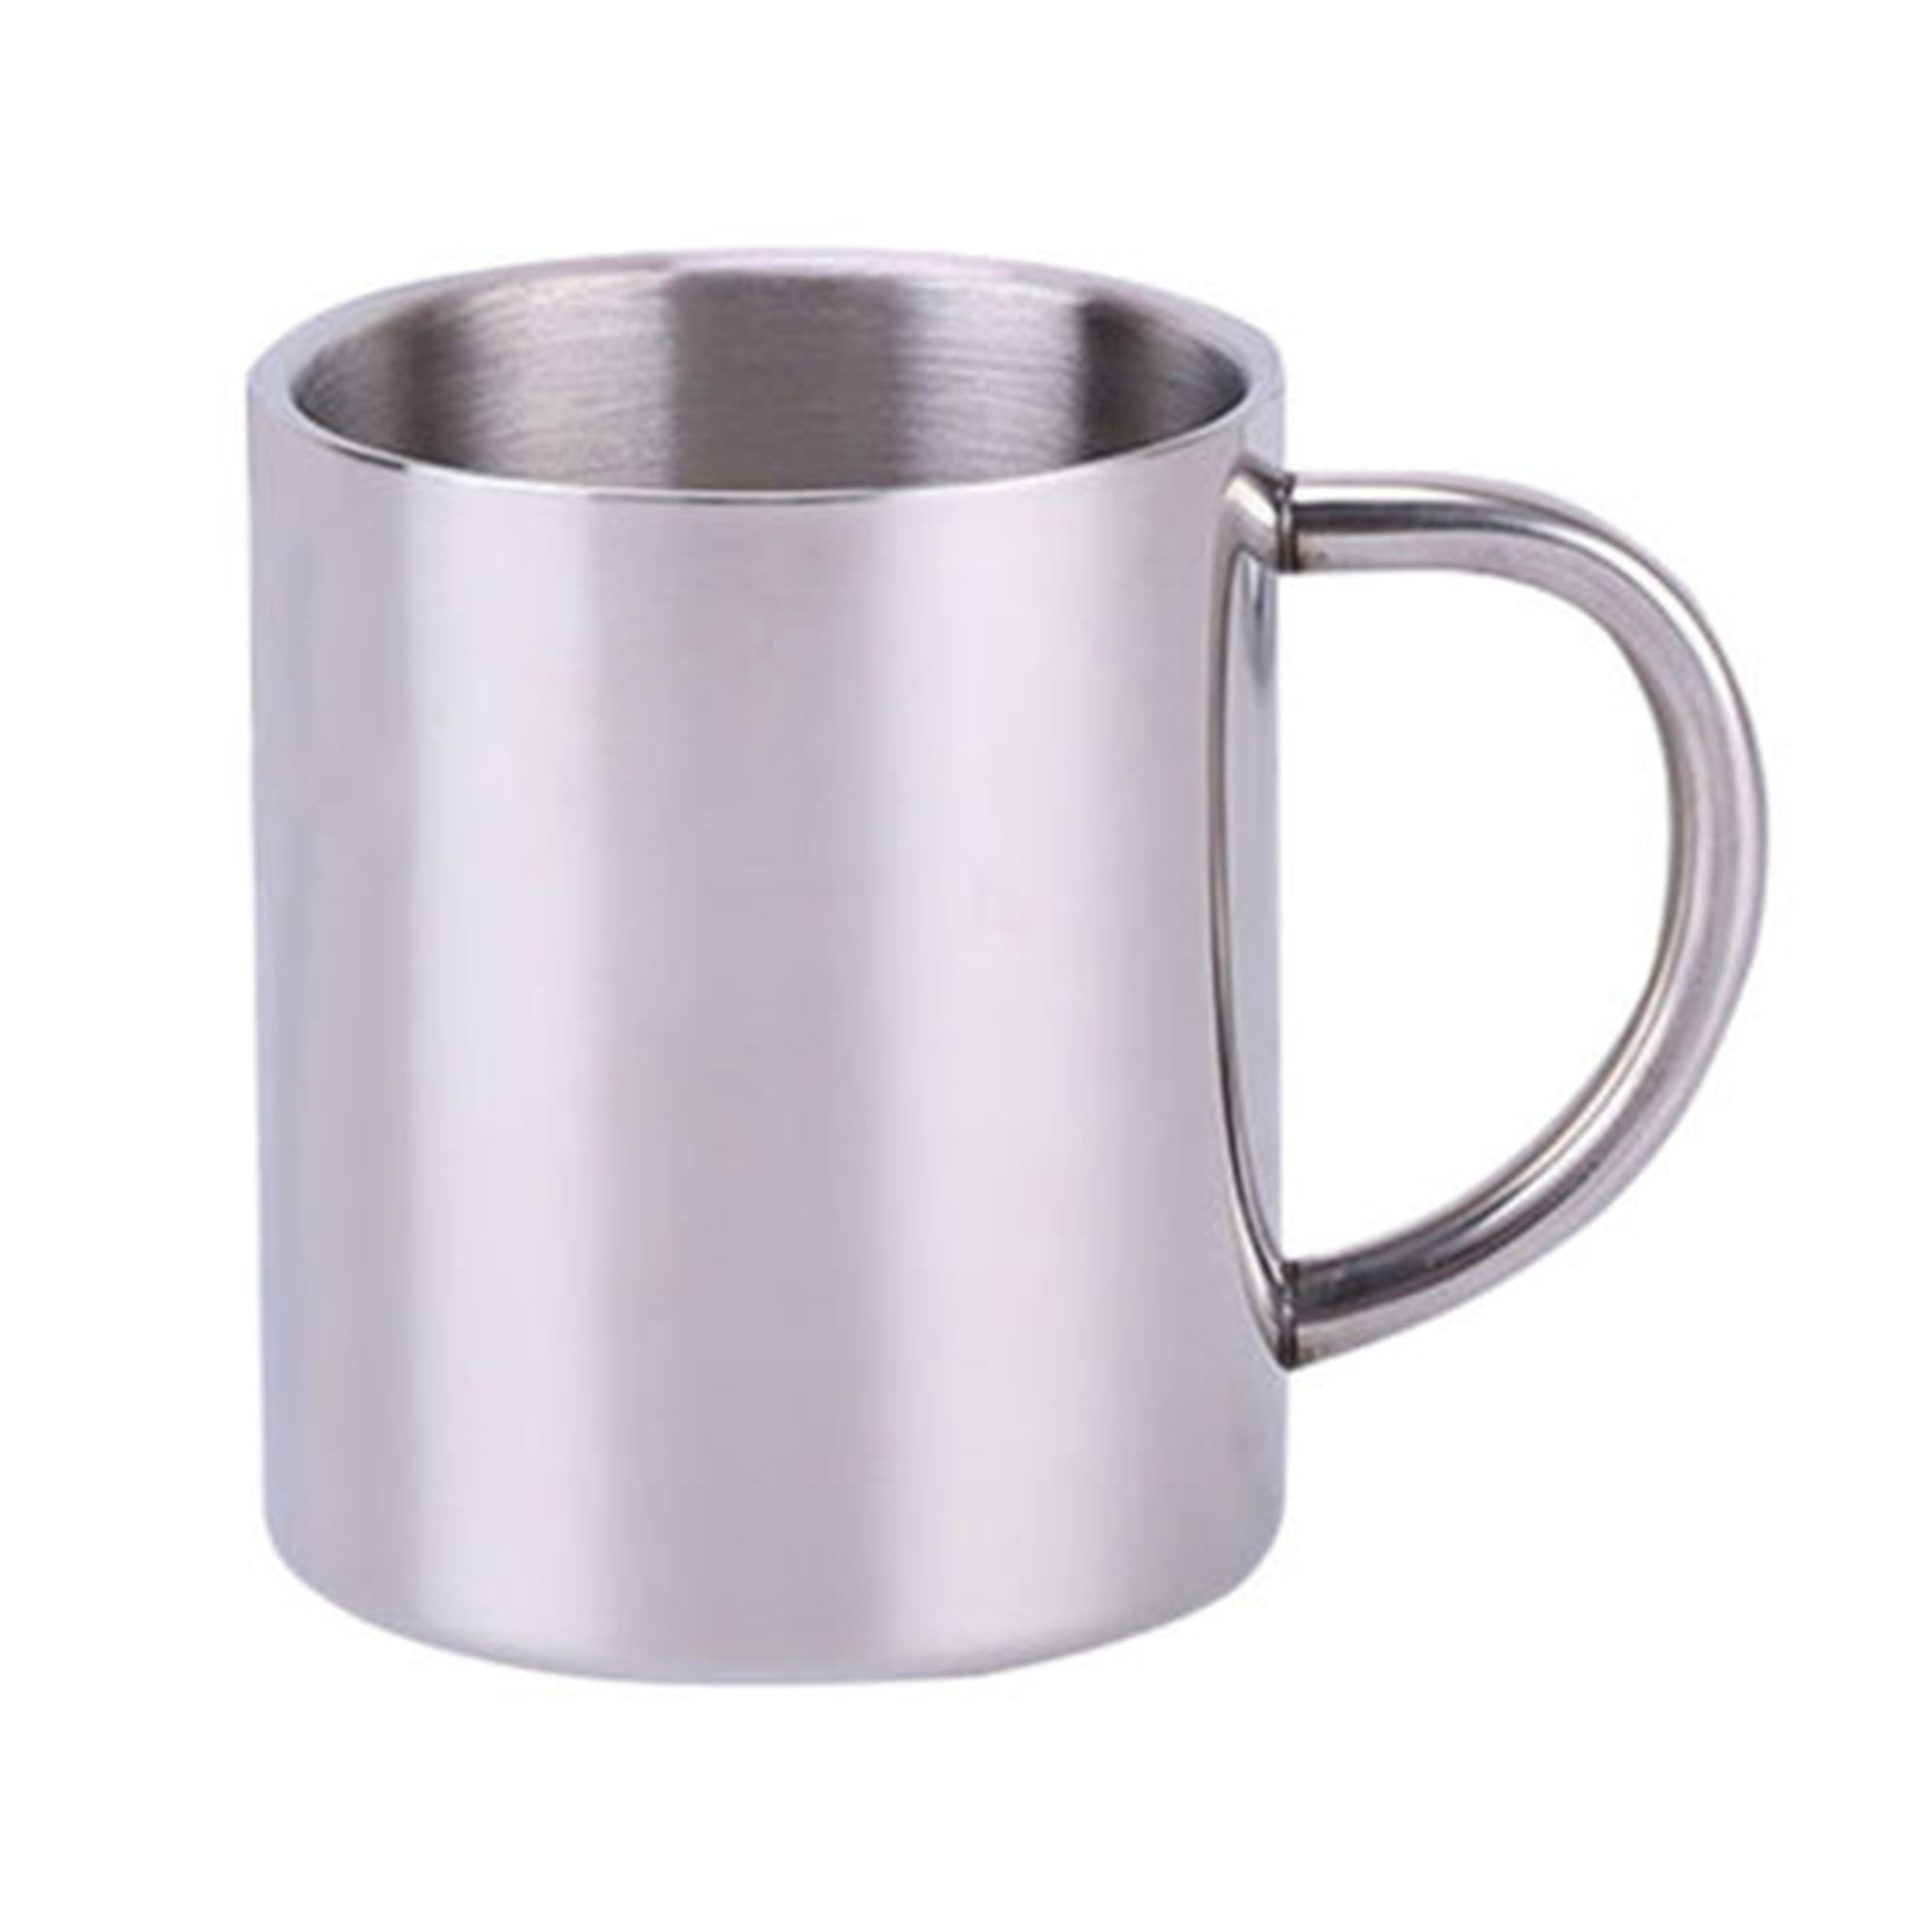 Car Mug Cup Thermo Insulated Double Wall Stainless Steel 400ml Home Office Trave 